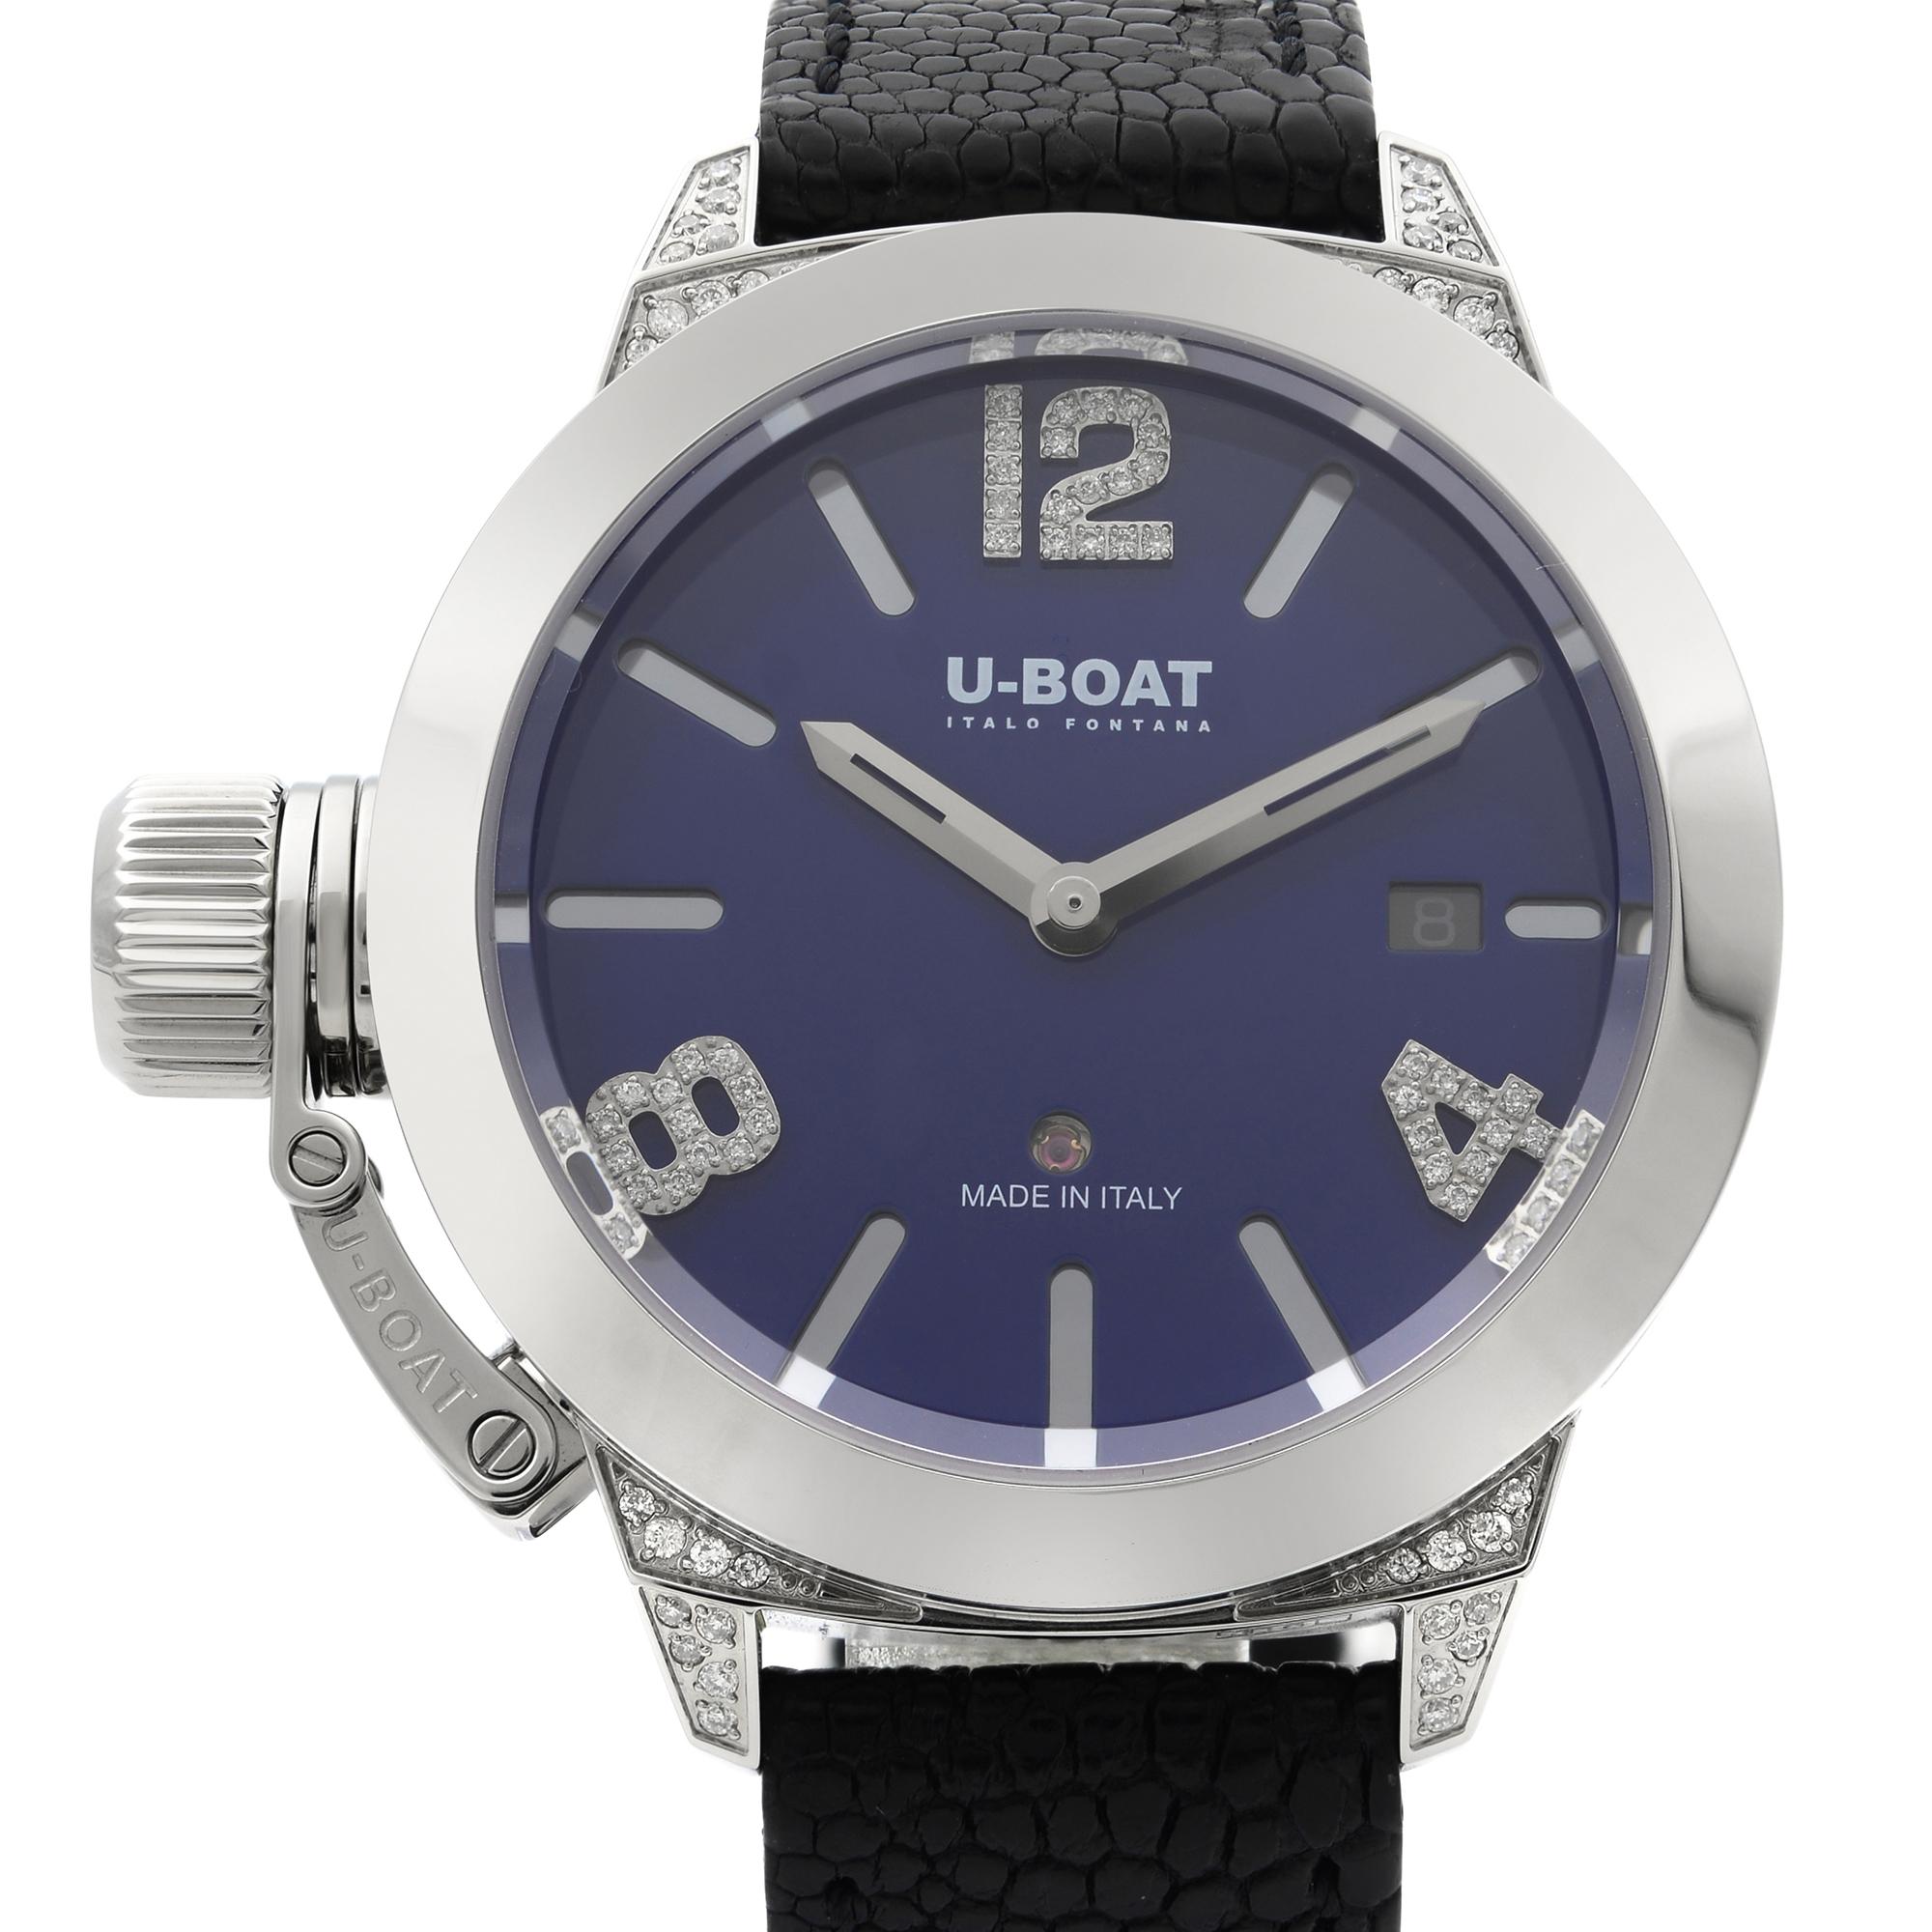 This never been worn U-Boat Classico 7077 is a beautiful men's timepiece that is powered by mechanical (automatic) movement which is cased in a stainless steel case. It has a round shape face, date indicator, diamond dial and has sticks and arabic